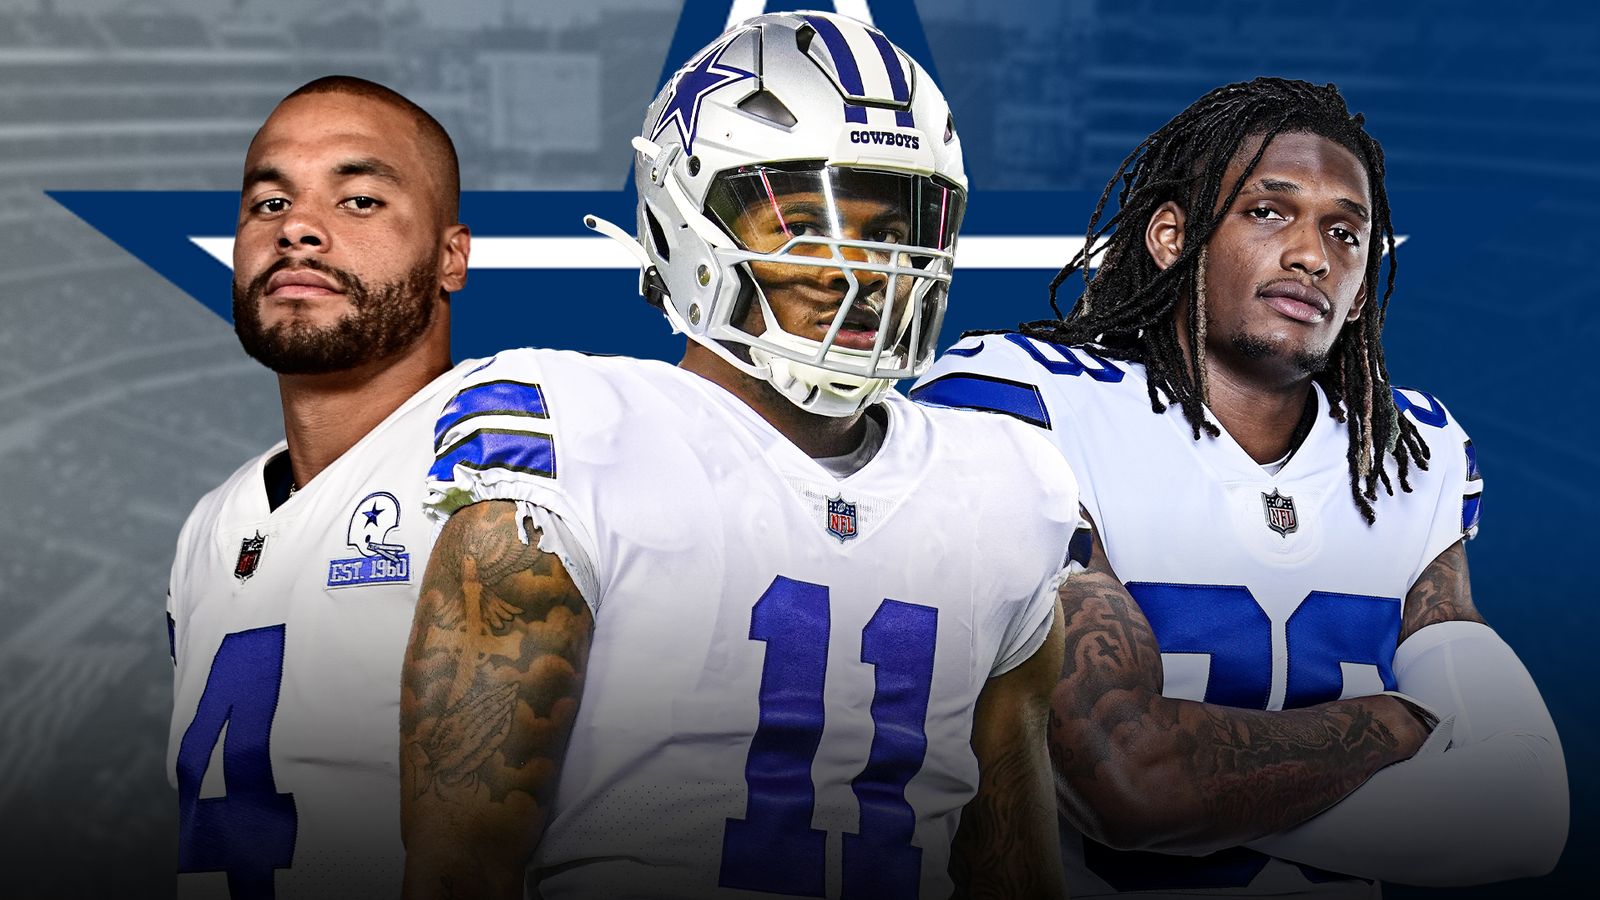 Dallas Cowboys: With Micah Parsons, Dak Prescott and possibly the addition of OBJ, could this finally be the Cowboys' year?